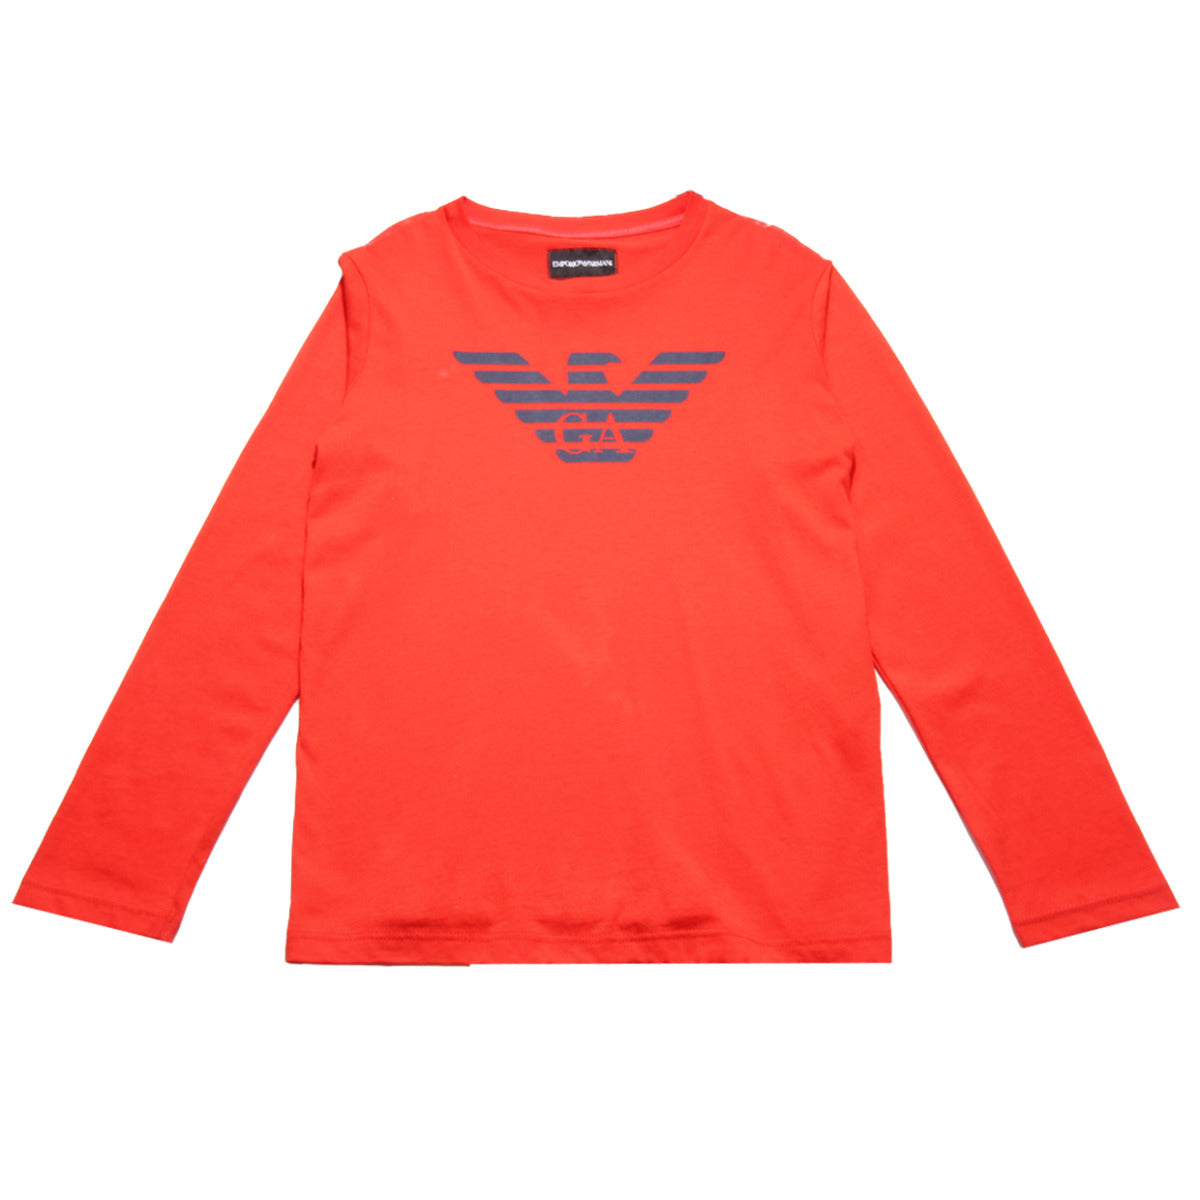 Emporio Armani Red Long Sleeved T-shirt front 